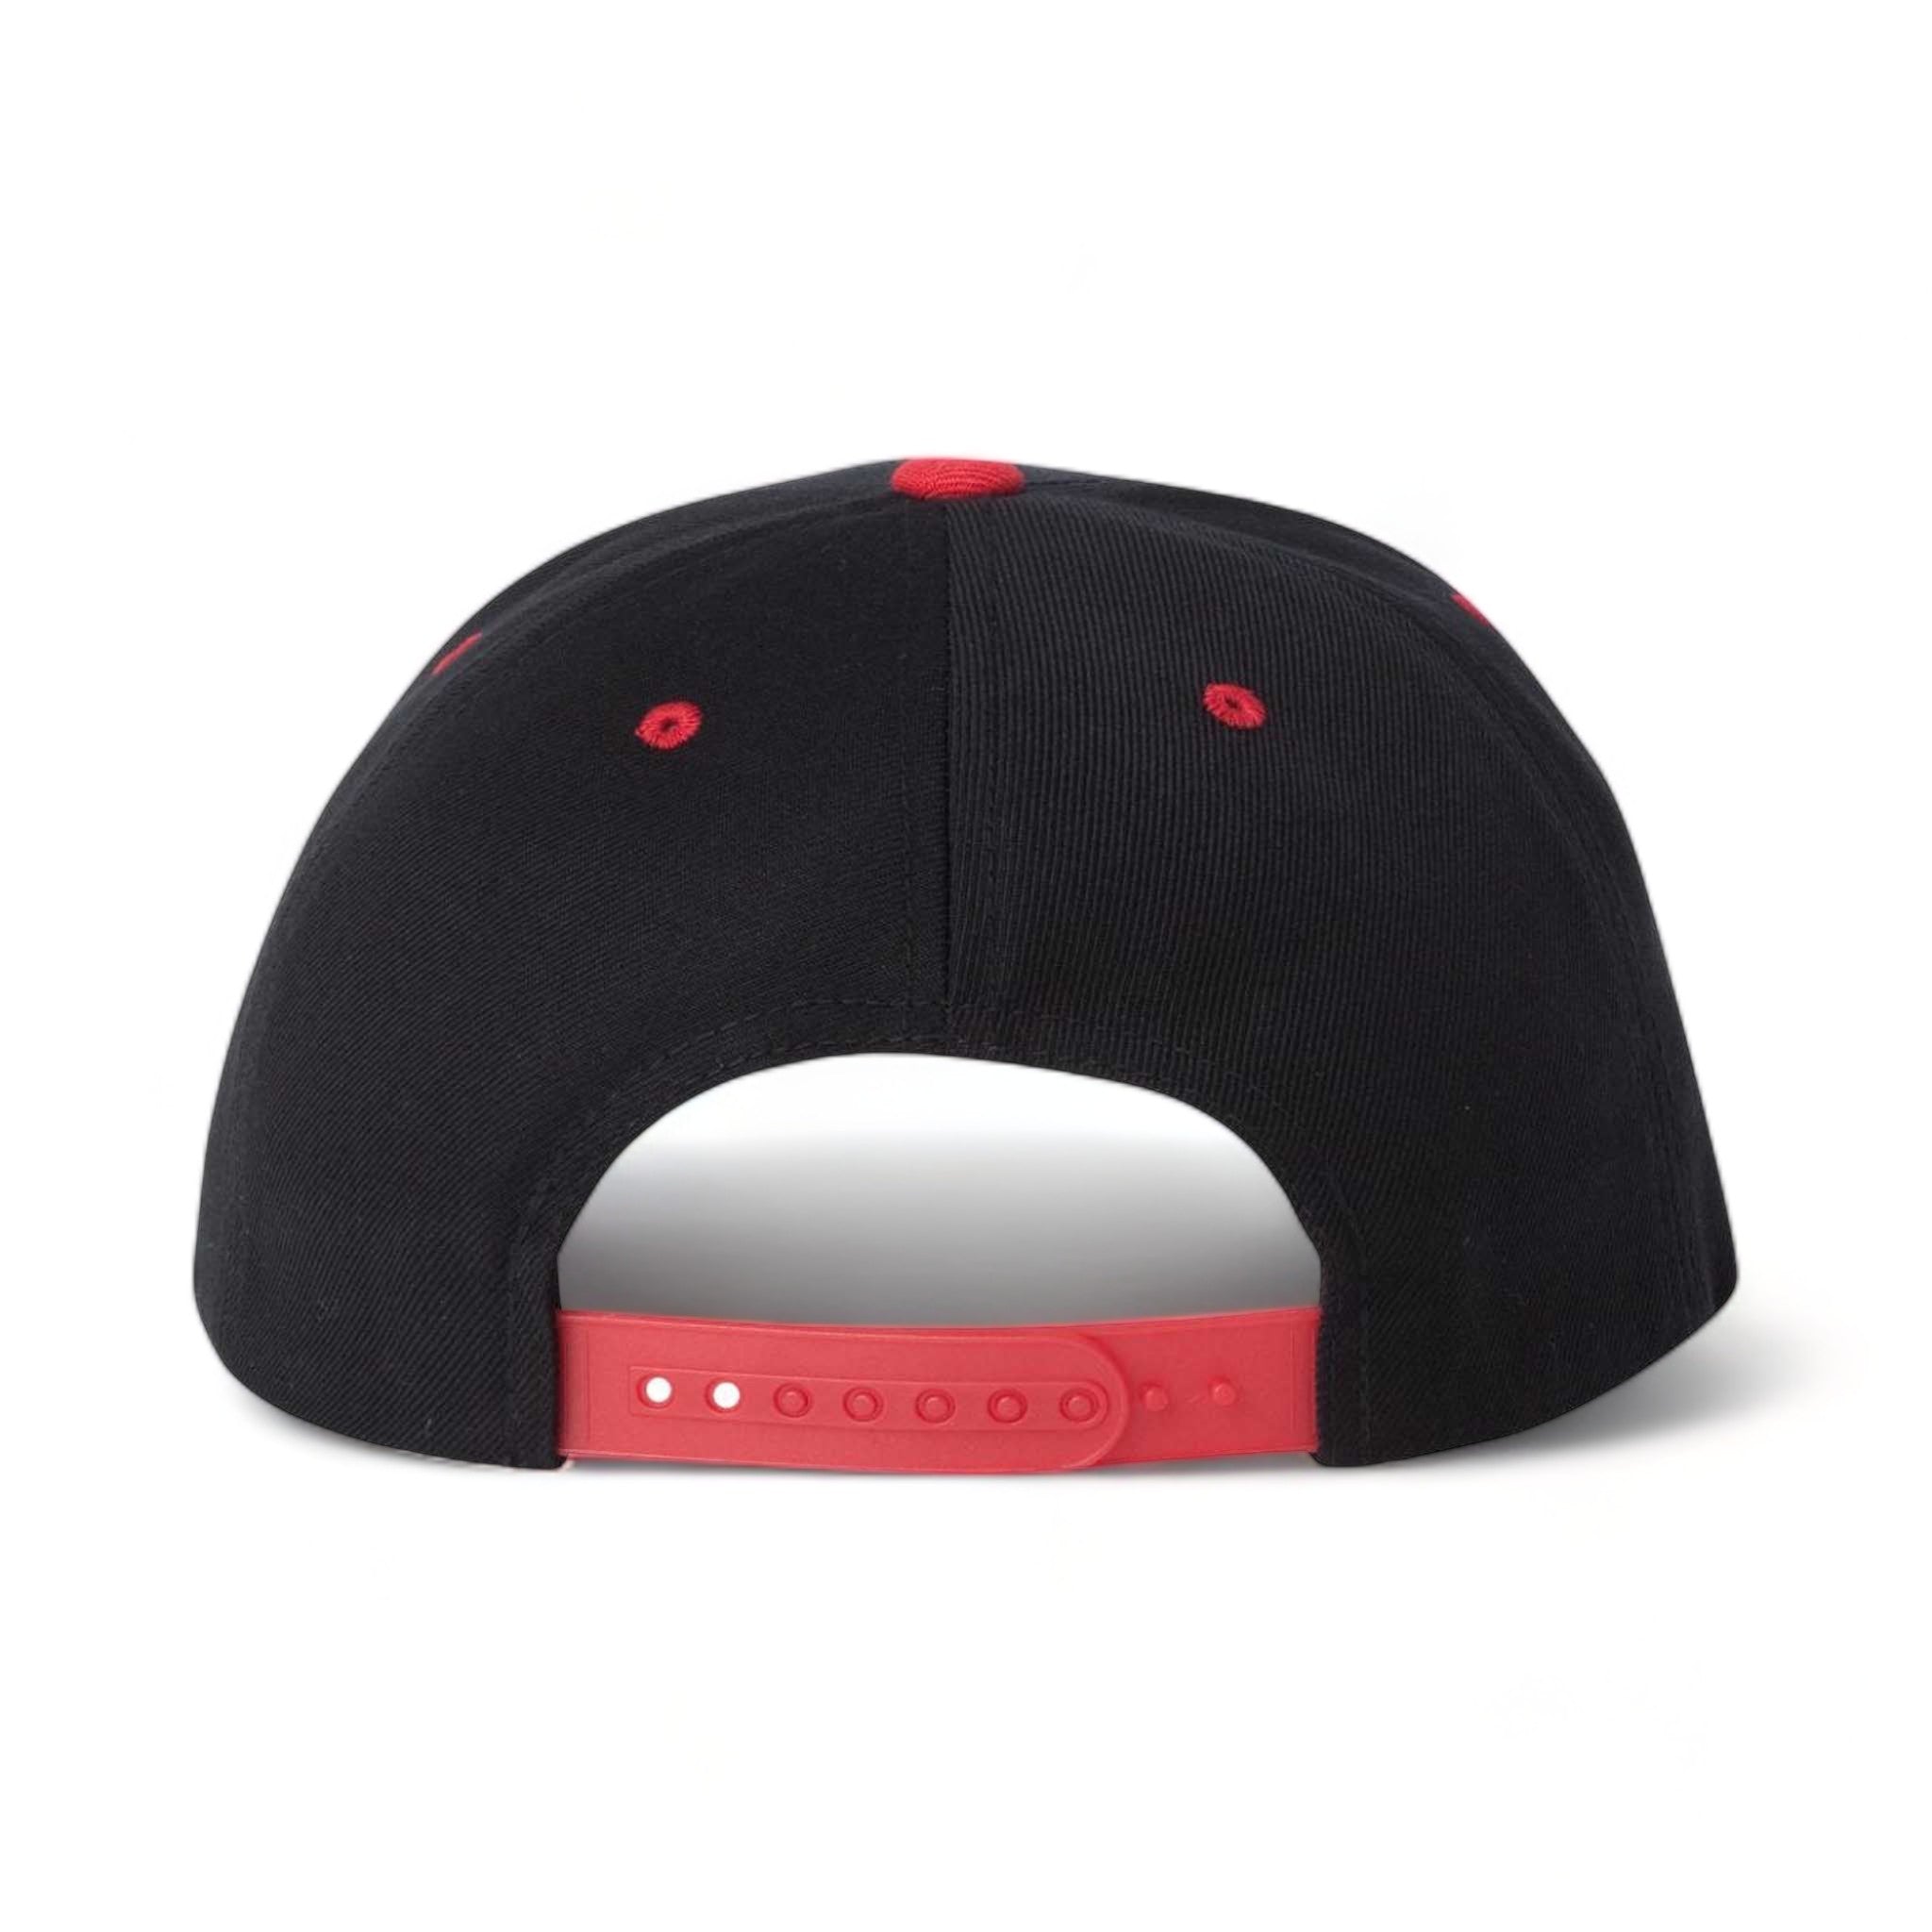 Back view of YP Classics 6089M custom hat in black and red